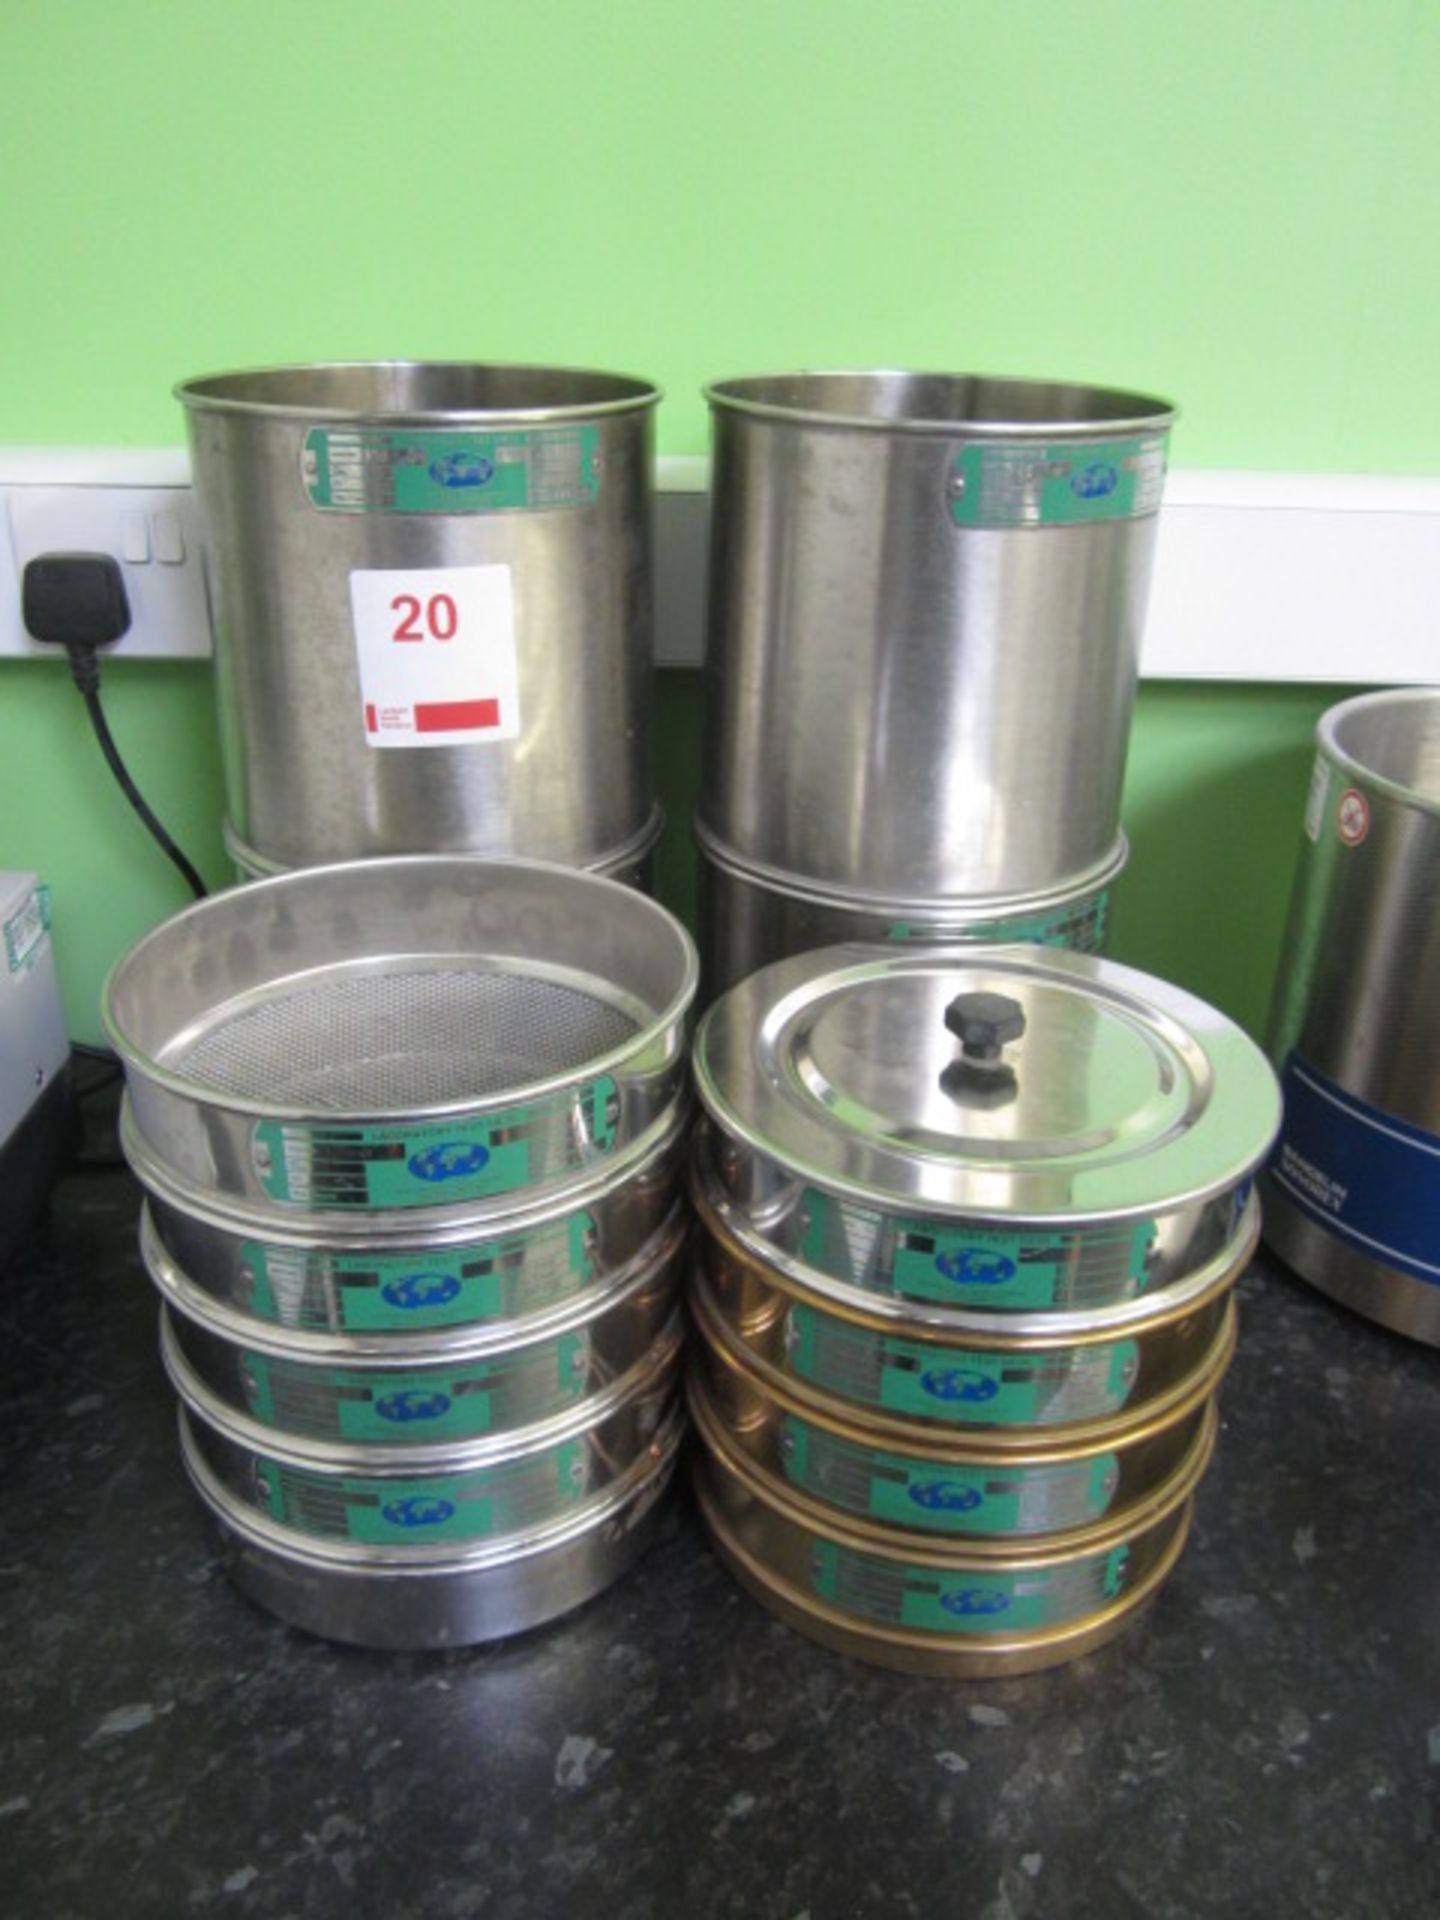 12 x various size and graded sieves, ranging from 20 Mic - 3.3mm,1 x bowl, 1 x lid